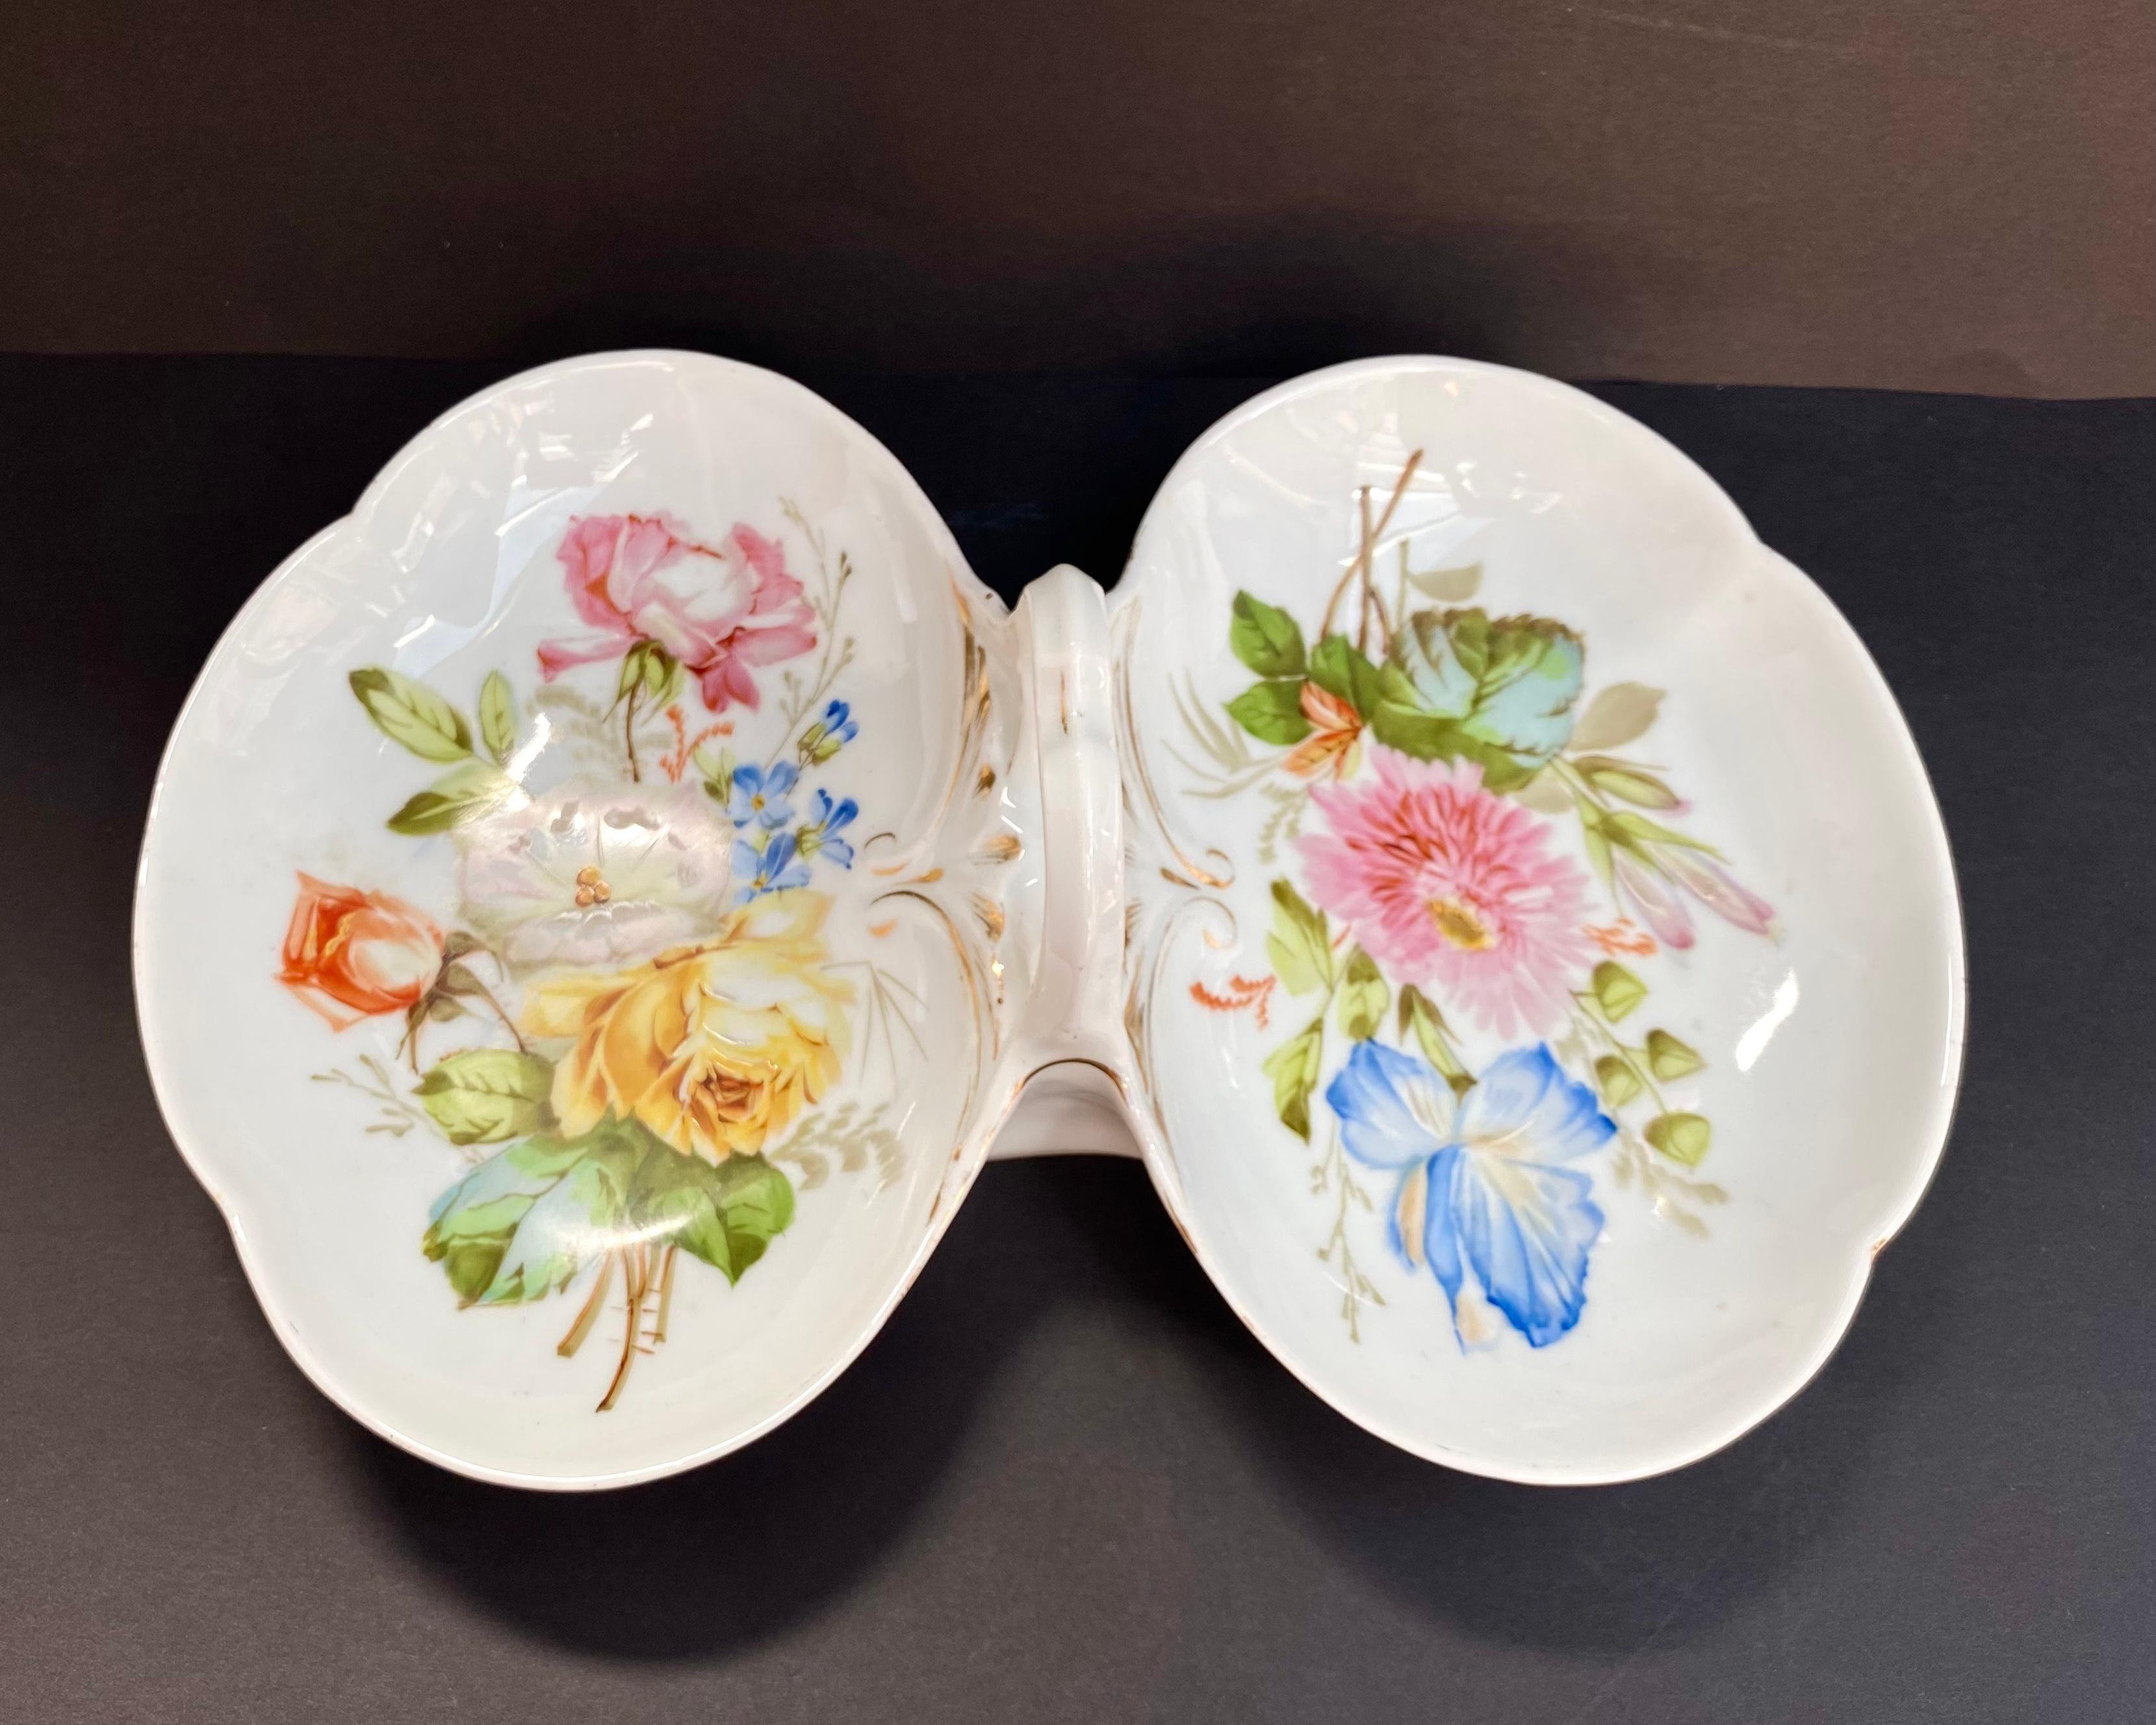 Luxurious Large Serving Plate With Two Sections, France, 1920s Antique Porcelain Partitioned Dish With Peonies And Rose Sectional Plate.

Antique serving plate hand decorated with images of lush garden peonies, roses and handwritten gold